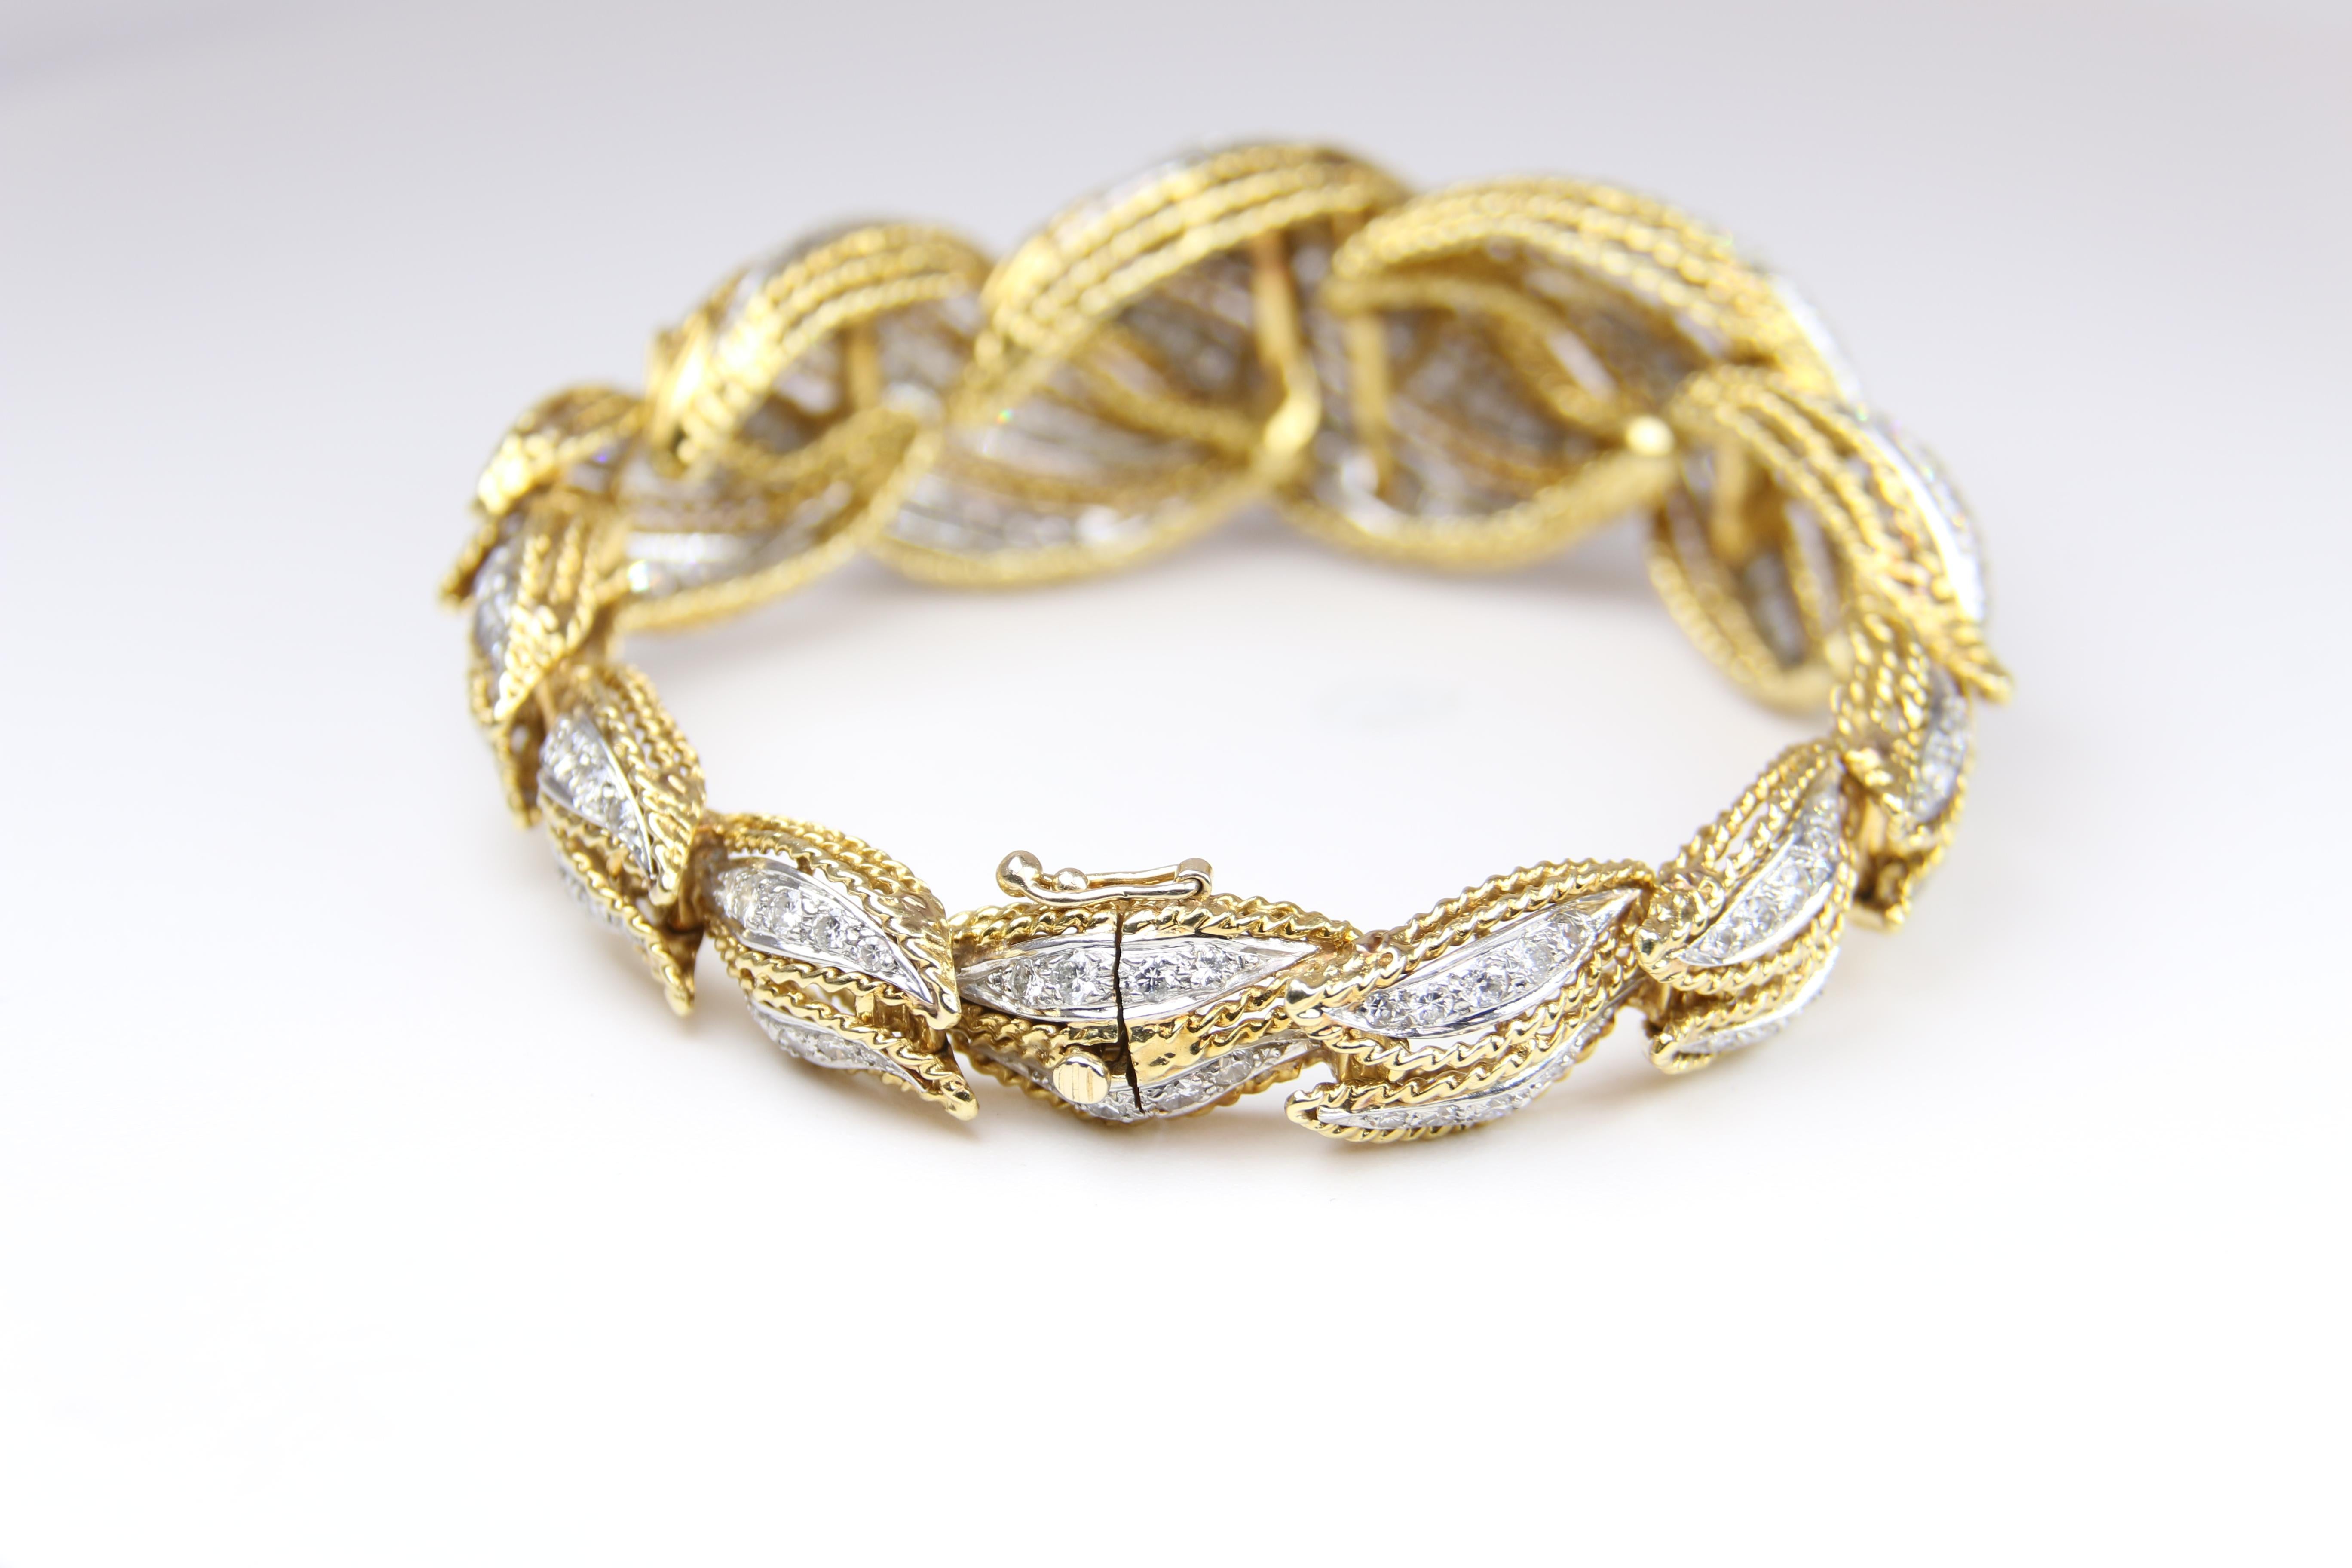 18K two toned diamond scrolled bracelet.  Diameter 6.5 inches  Hidden Clasp.  Scrolls get larger in the middle of the bracelet with width at the largest portion of the bracelet of 1 inch.  